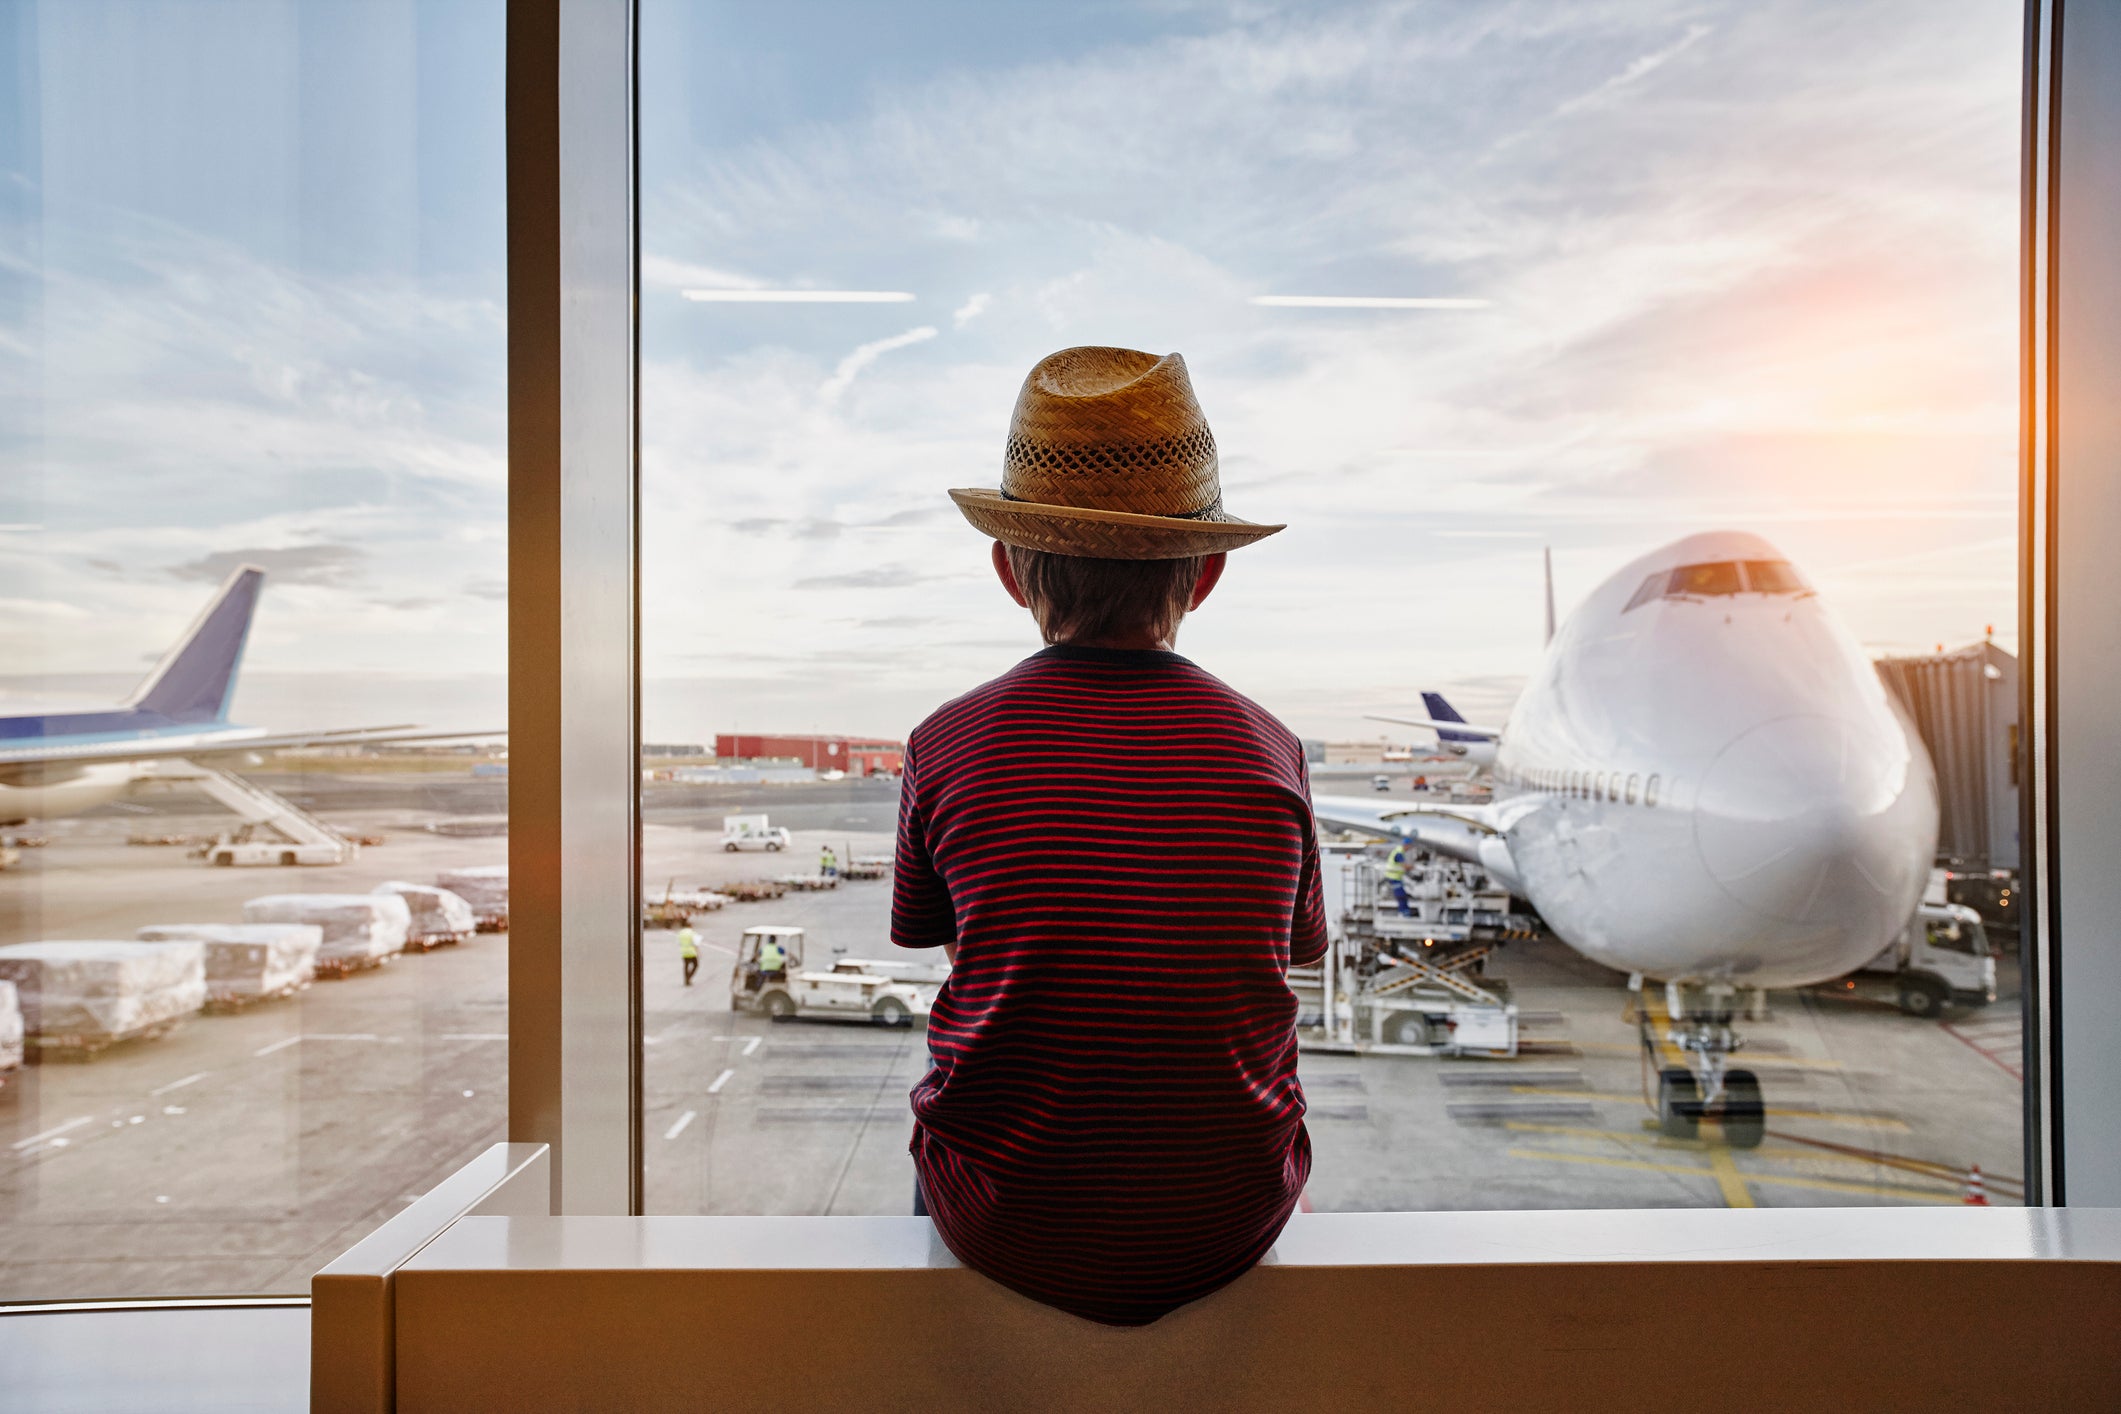 Kid watching planes at the airport